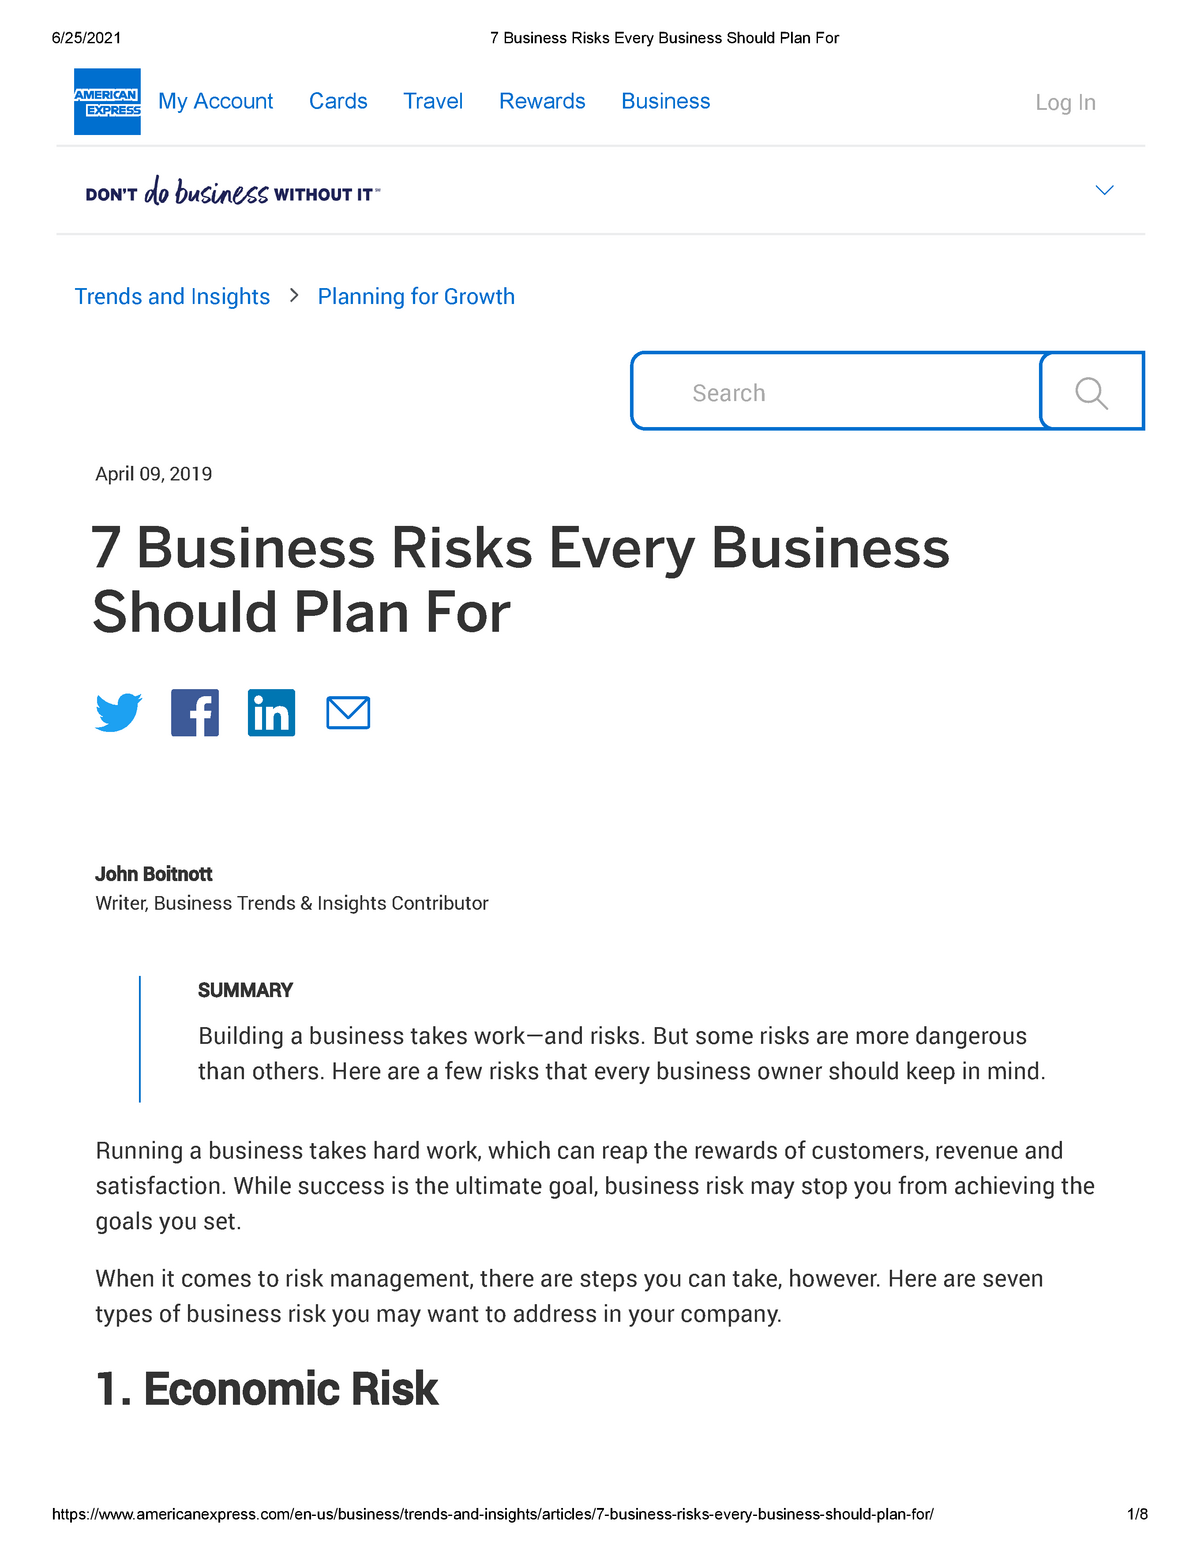 a business plan should include and discuss risks